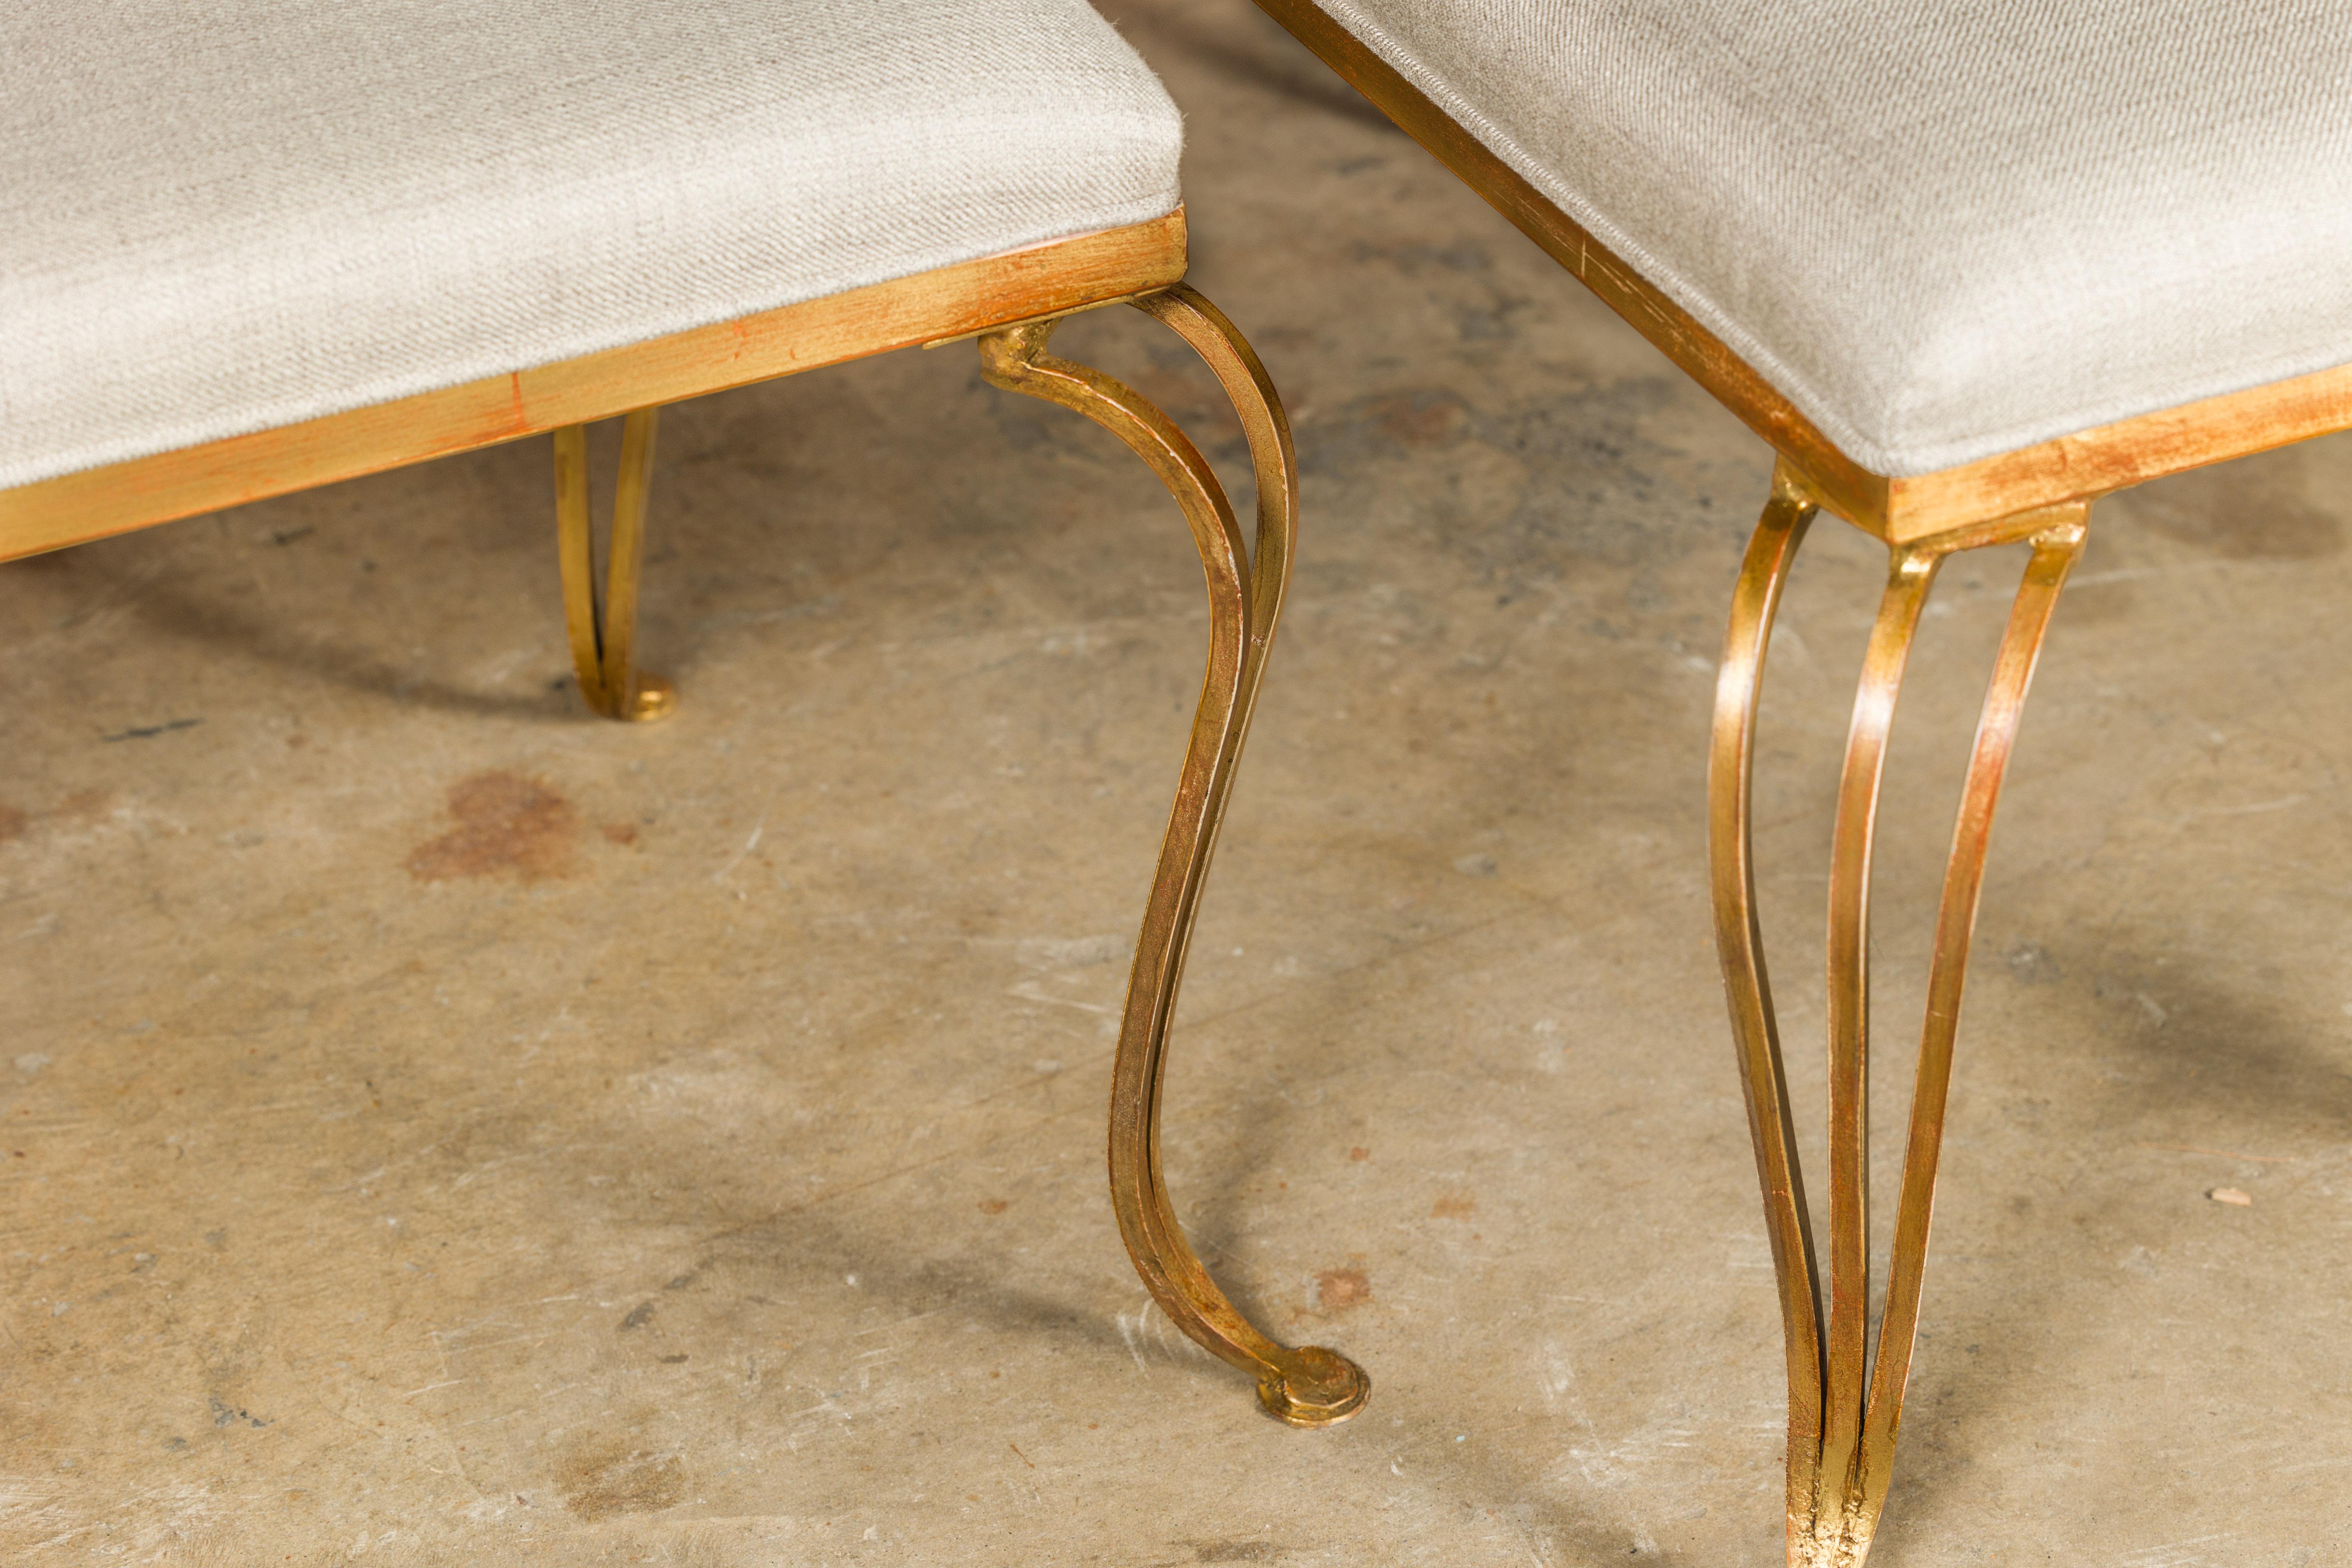 Midcentury French Gilt Metal Benches with Cabriole Legs and Upholstery, a Pair For Sale 5